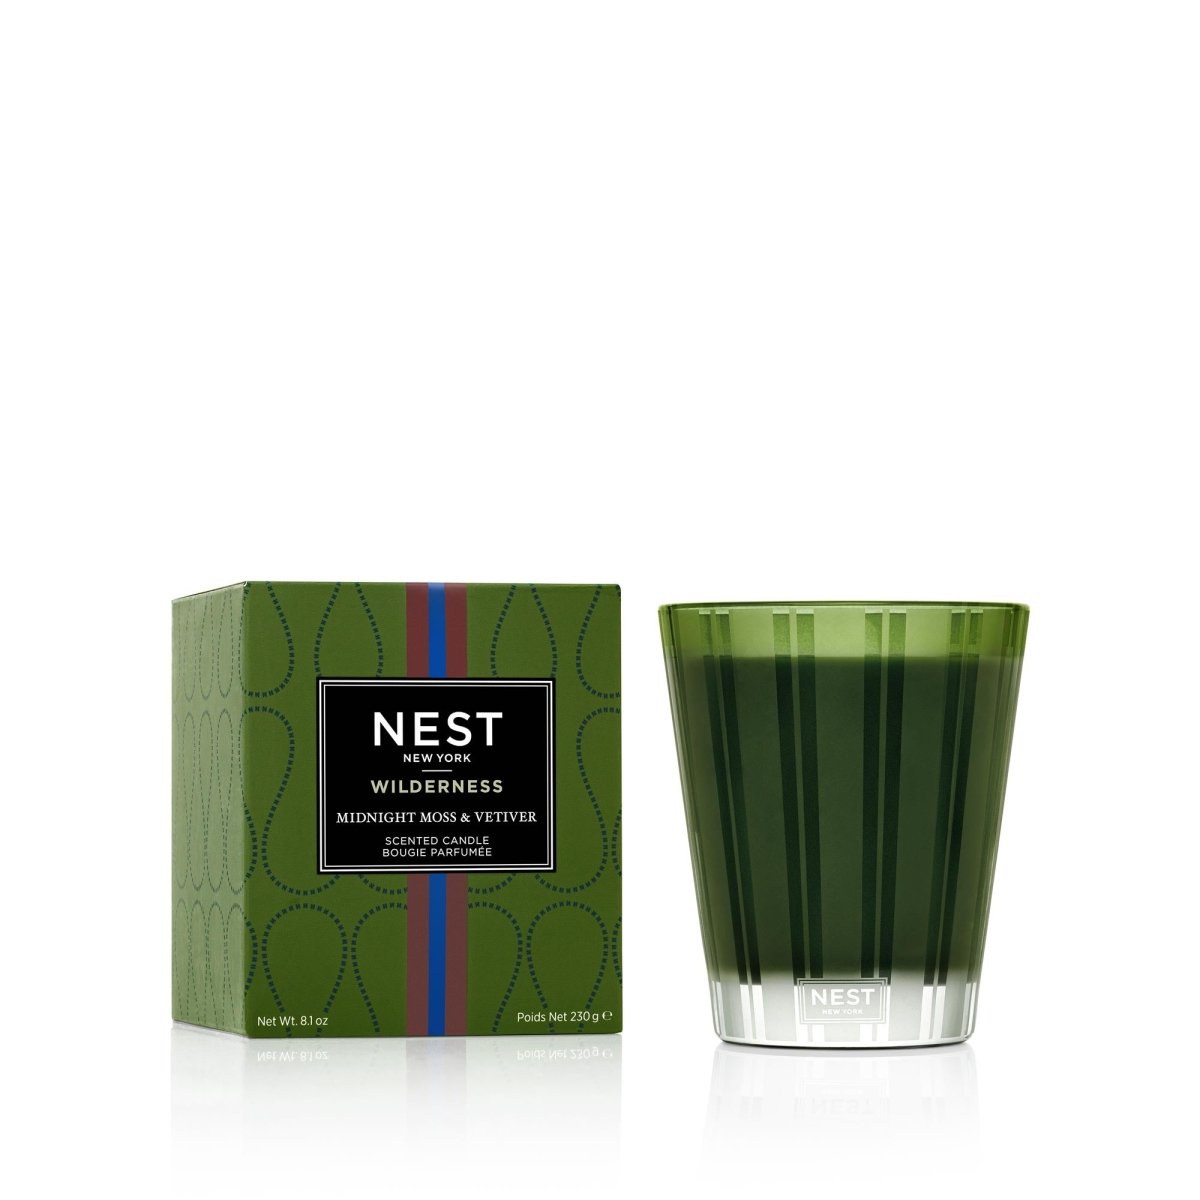 Nest Midnight Moss & Vetiver Classic Candle